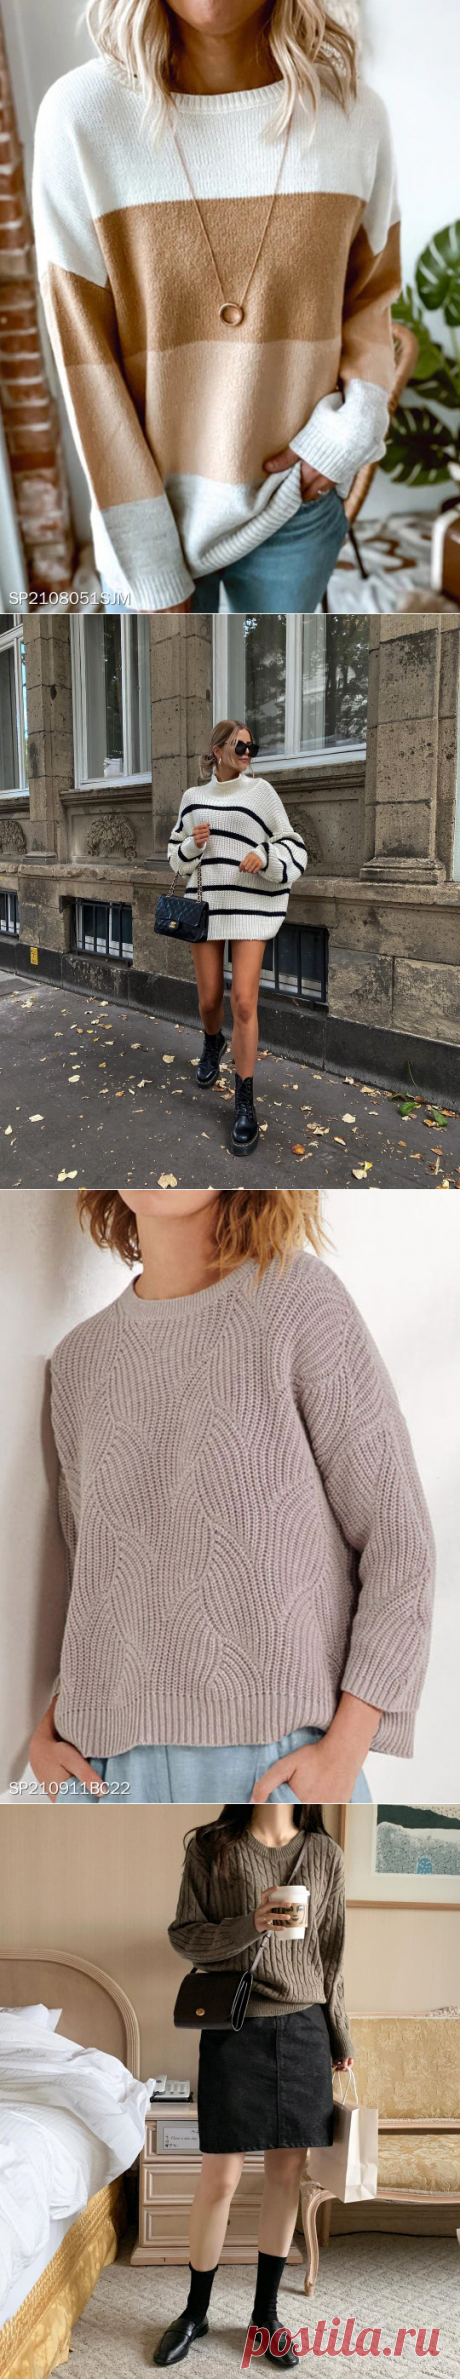 How To Style Fall Outfit With Cozy Sweaters Under $50 | Fashion Blog &amp; Magazine